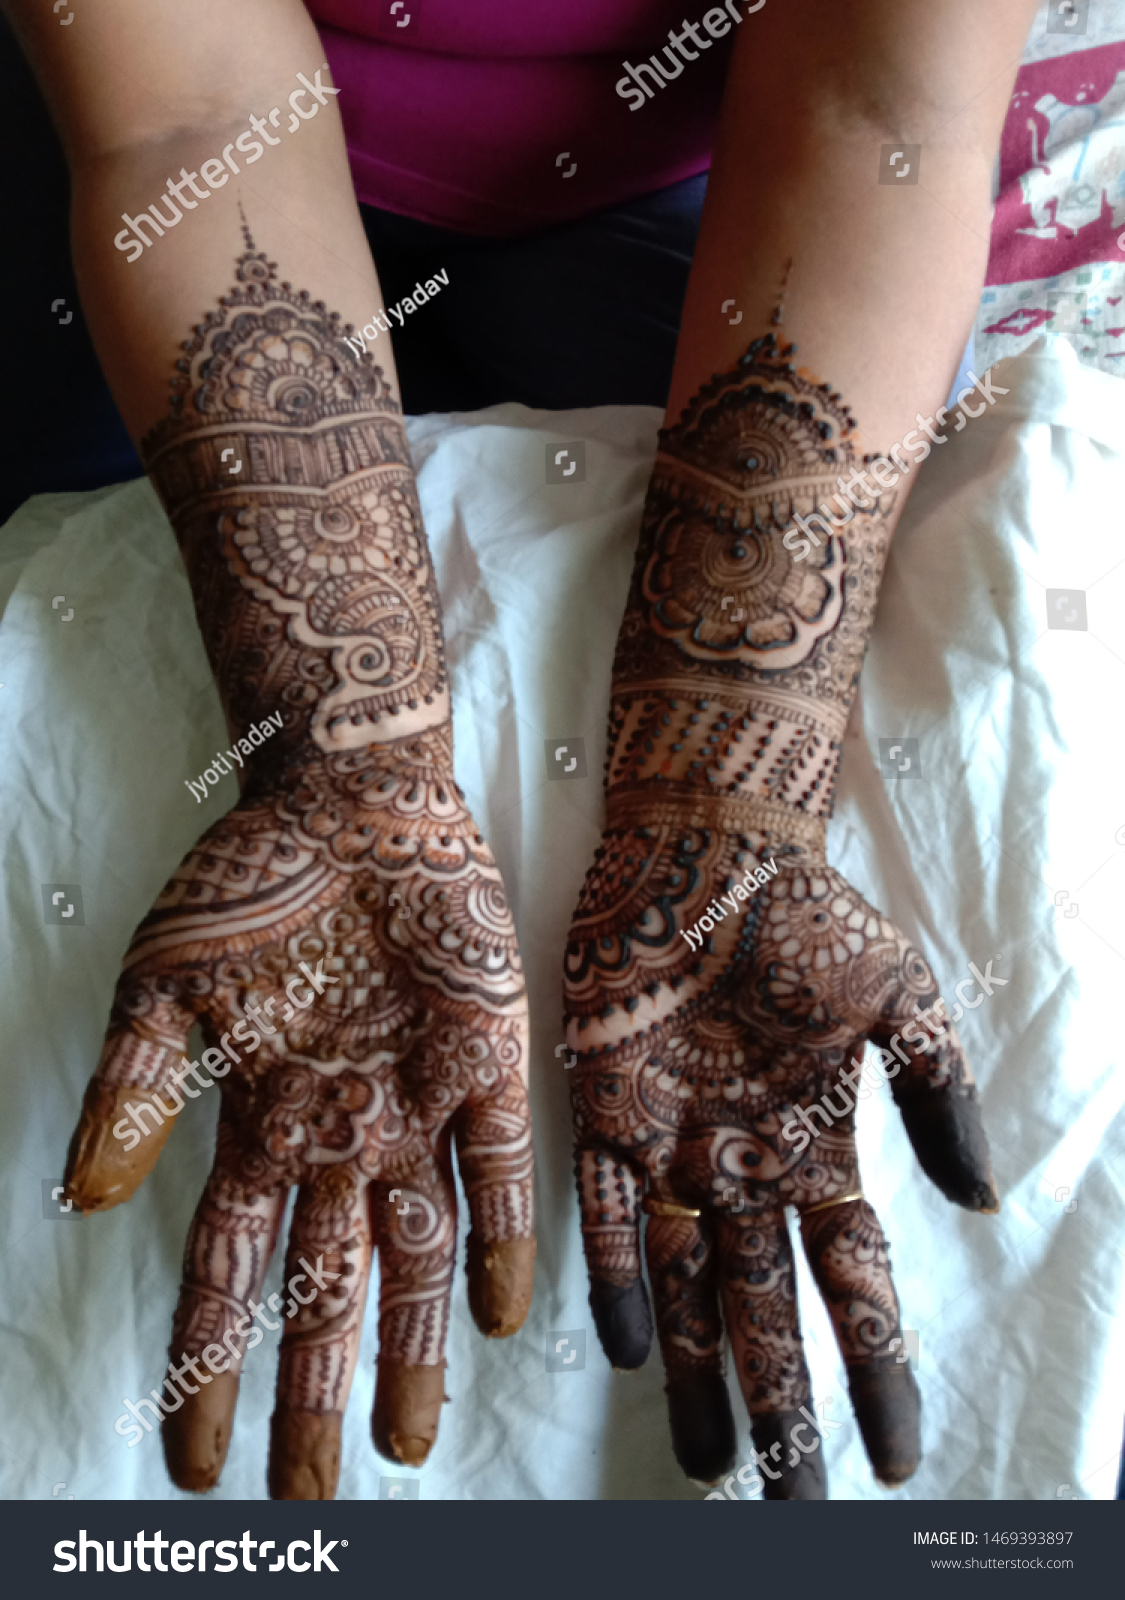 Mehndi Design All Time Fashion Indian Wedding Demand Of Art Womans Love Engagement Dairy Unique Style Today, girls of all ages prefer to carry designs which involve simpler motifs and look more. shutterstock